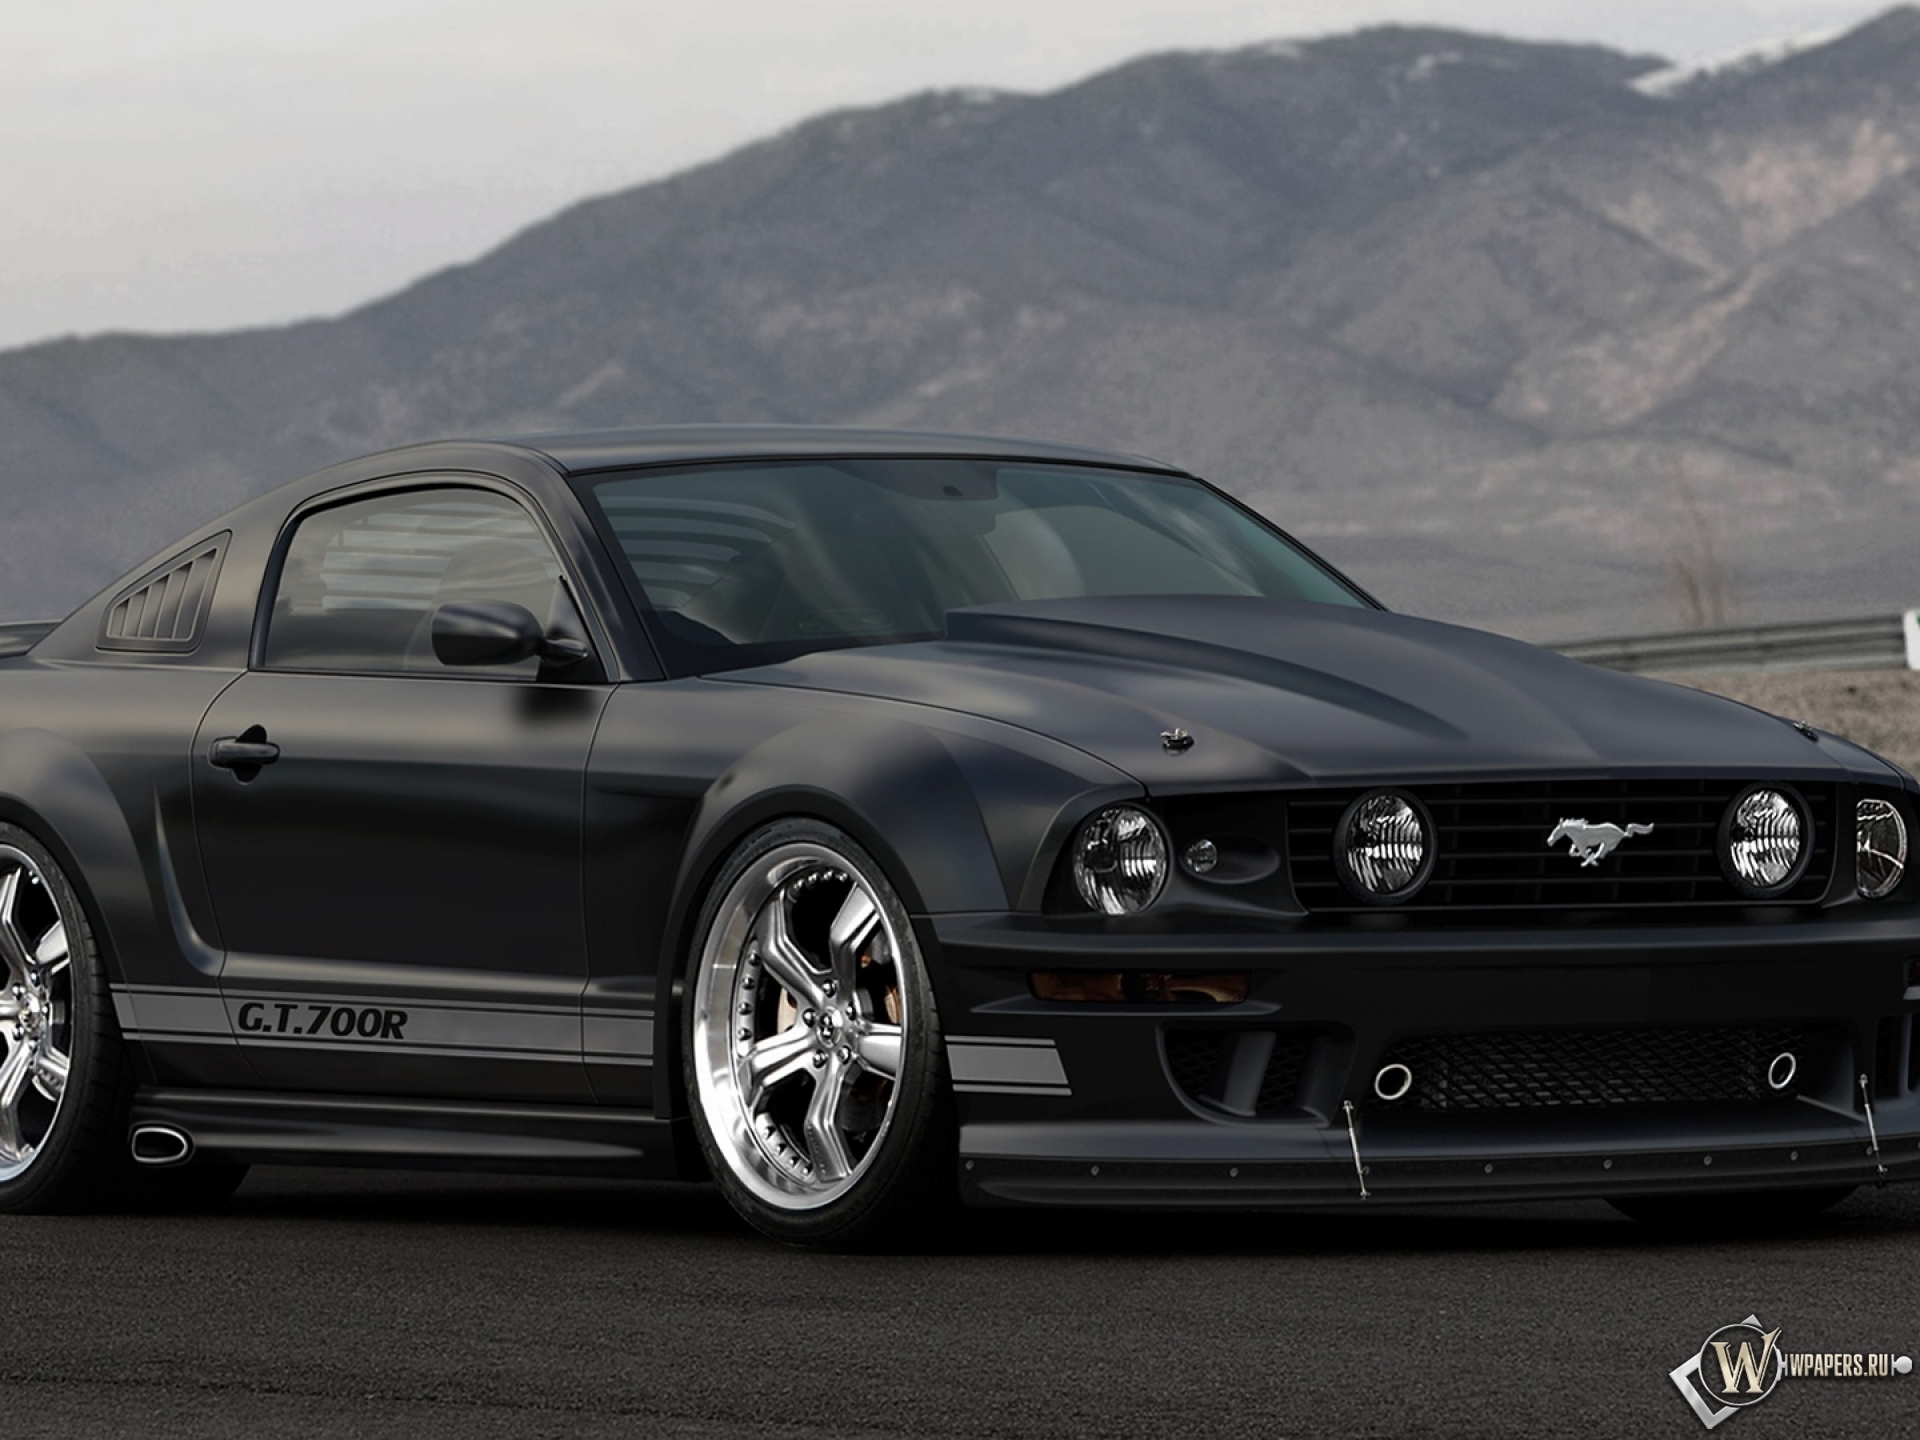 FORD MUSTANG GT 700 1920x1440